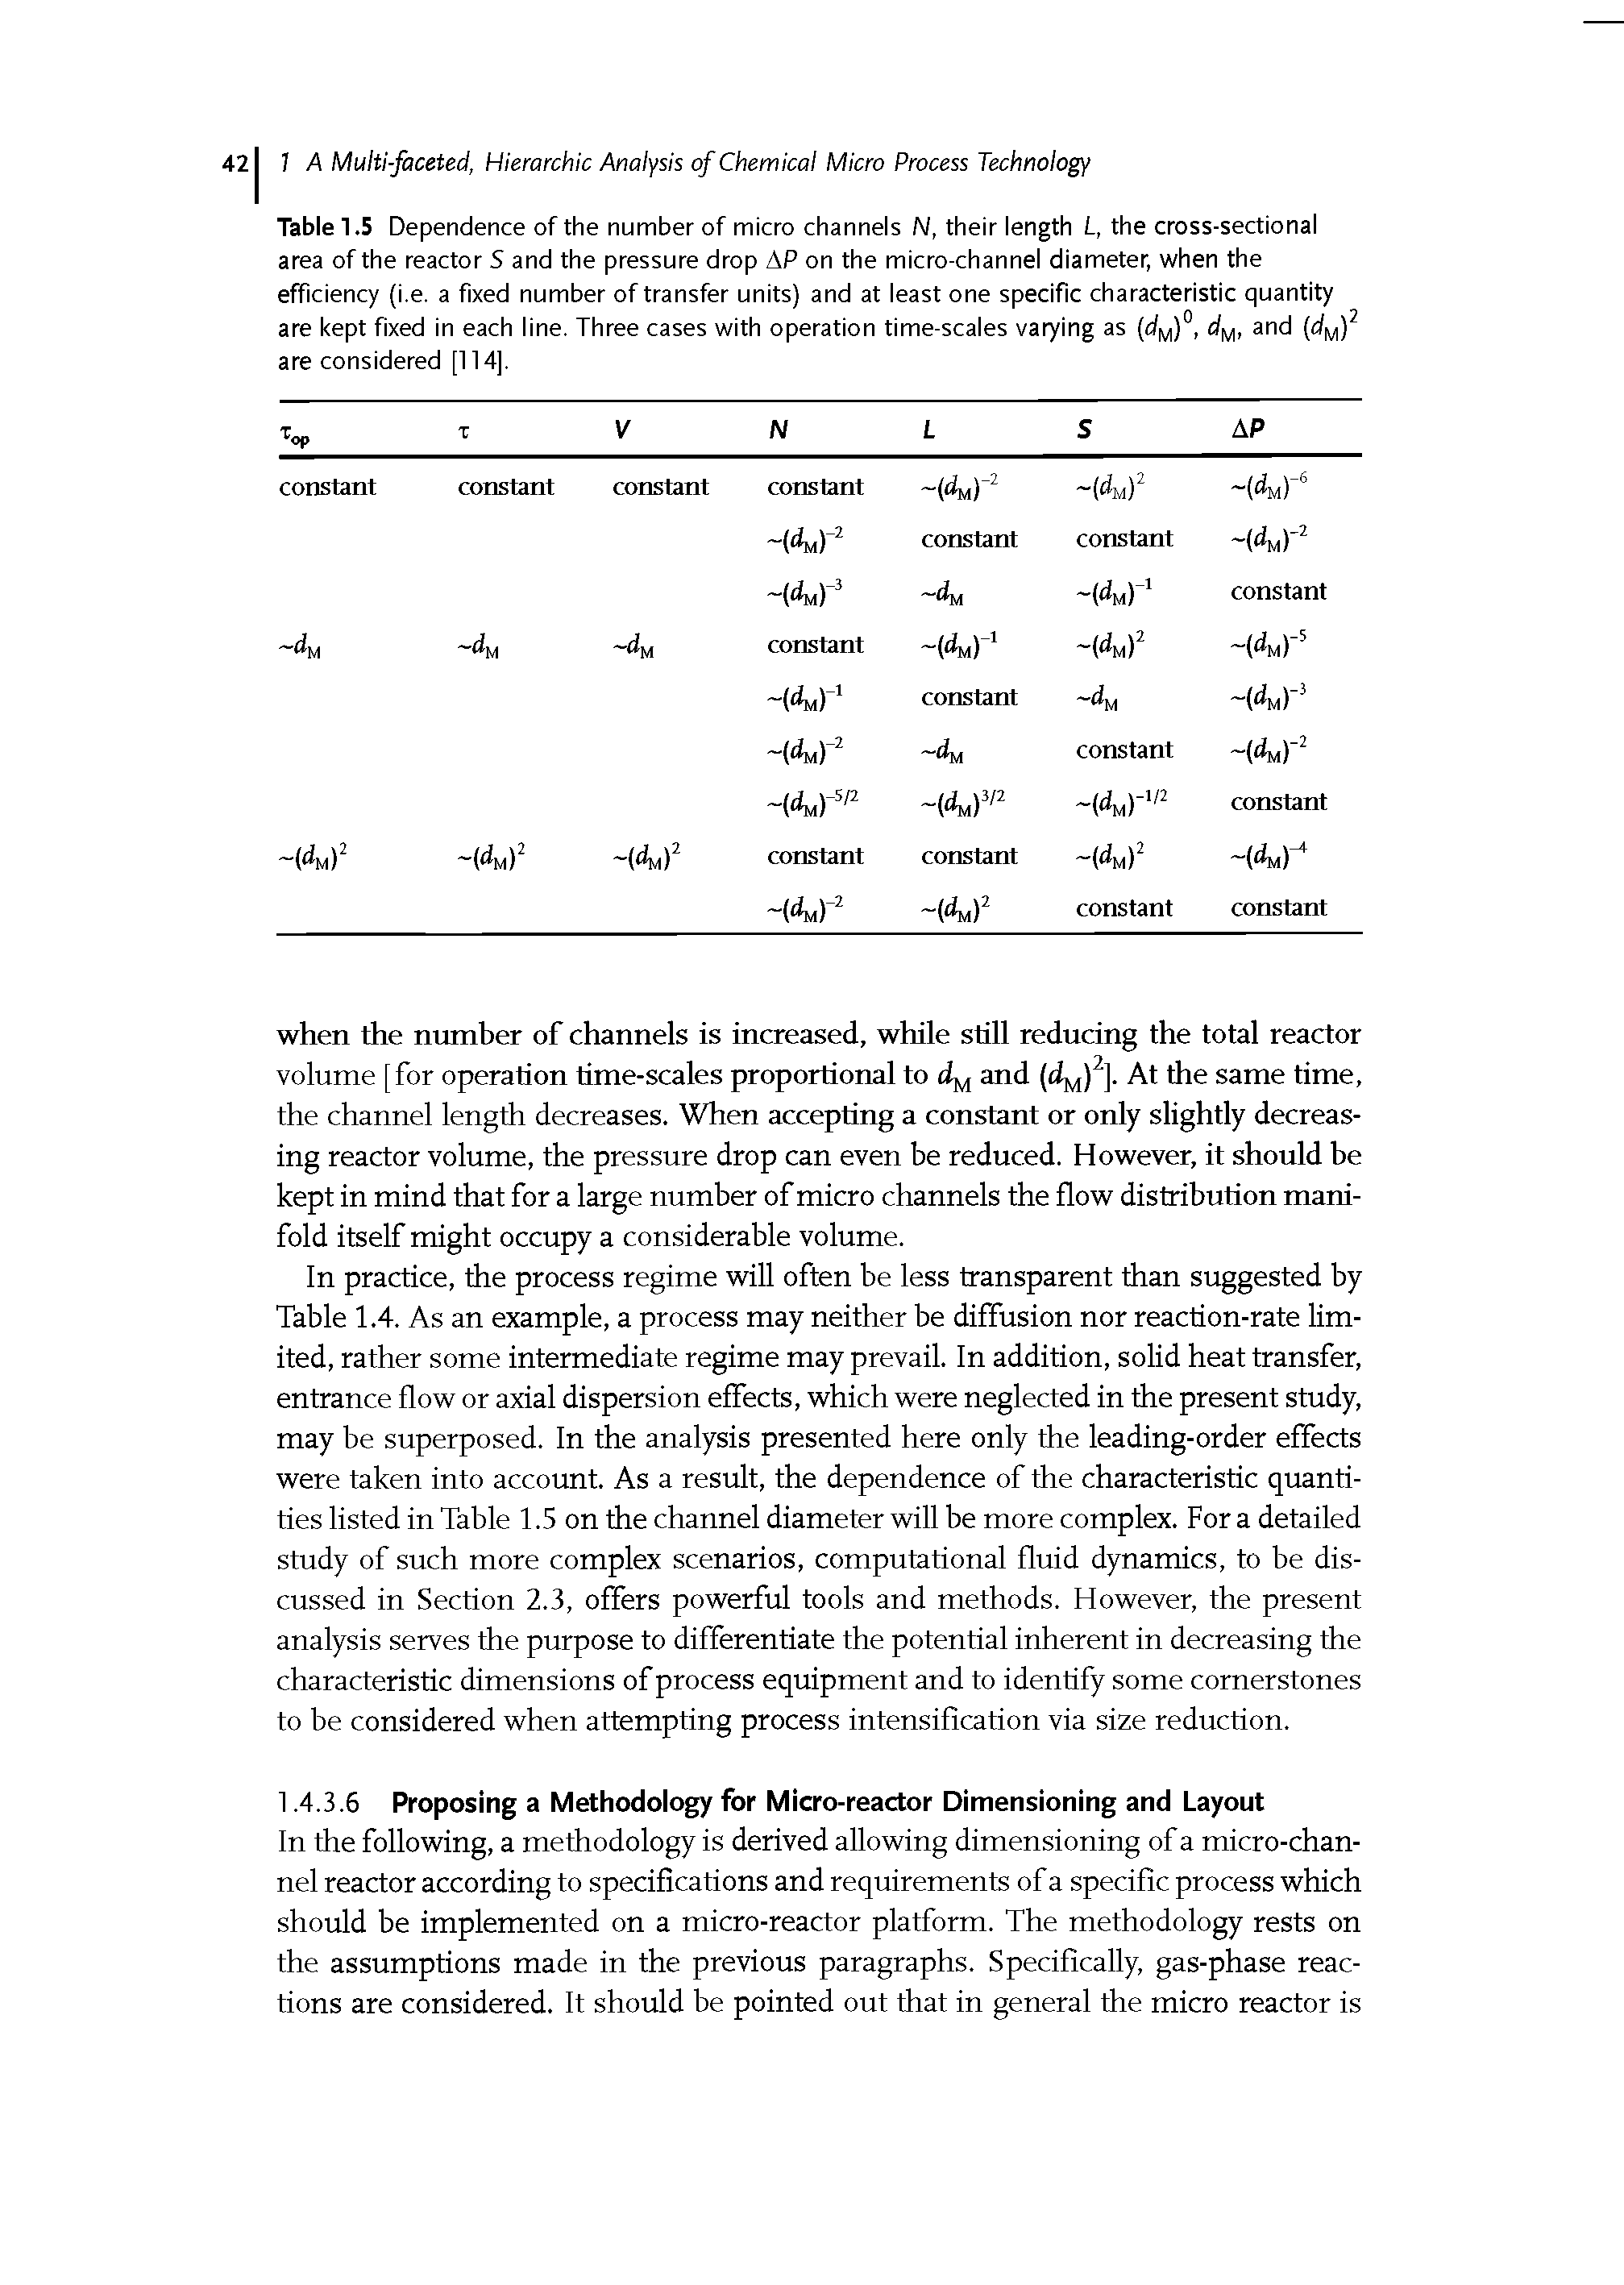 Table 1.5 Dependence of the number of micro channels N, their length L, the cross-sectional area of the reactor S and the pressure drop AP on the micro-channel diameter, when the efficiency (i.e. a fixed number of transfer units) and at least one specific characteristic quantity are kept fixed in each line. Three cases with operation time-scales varying as (c/m)°. are considered [114],...